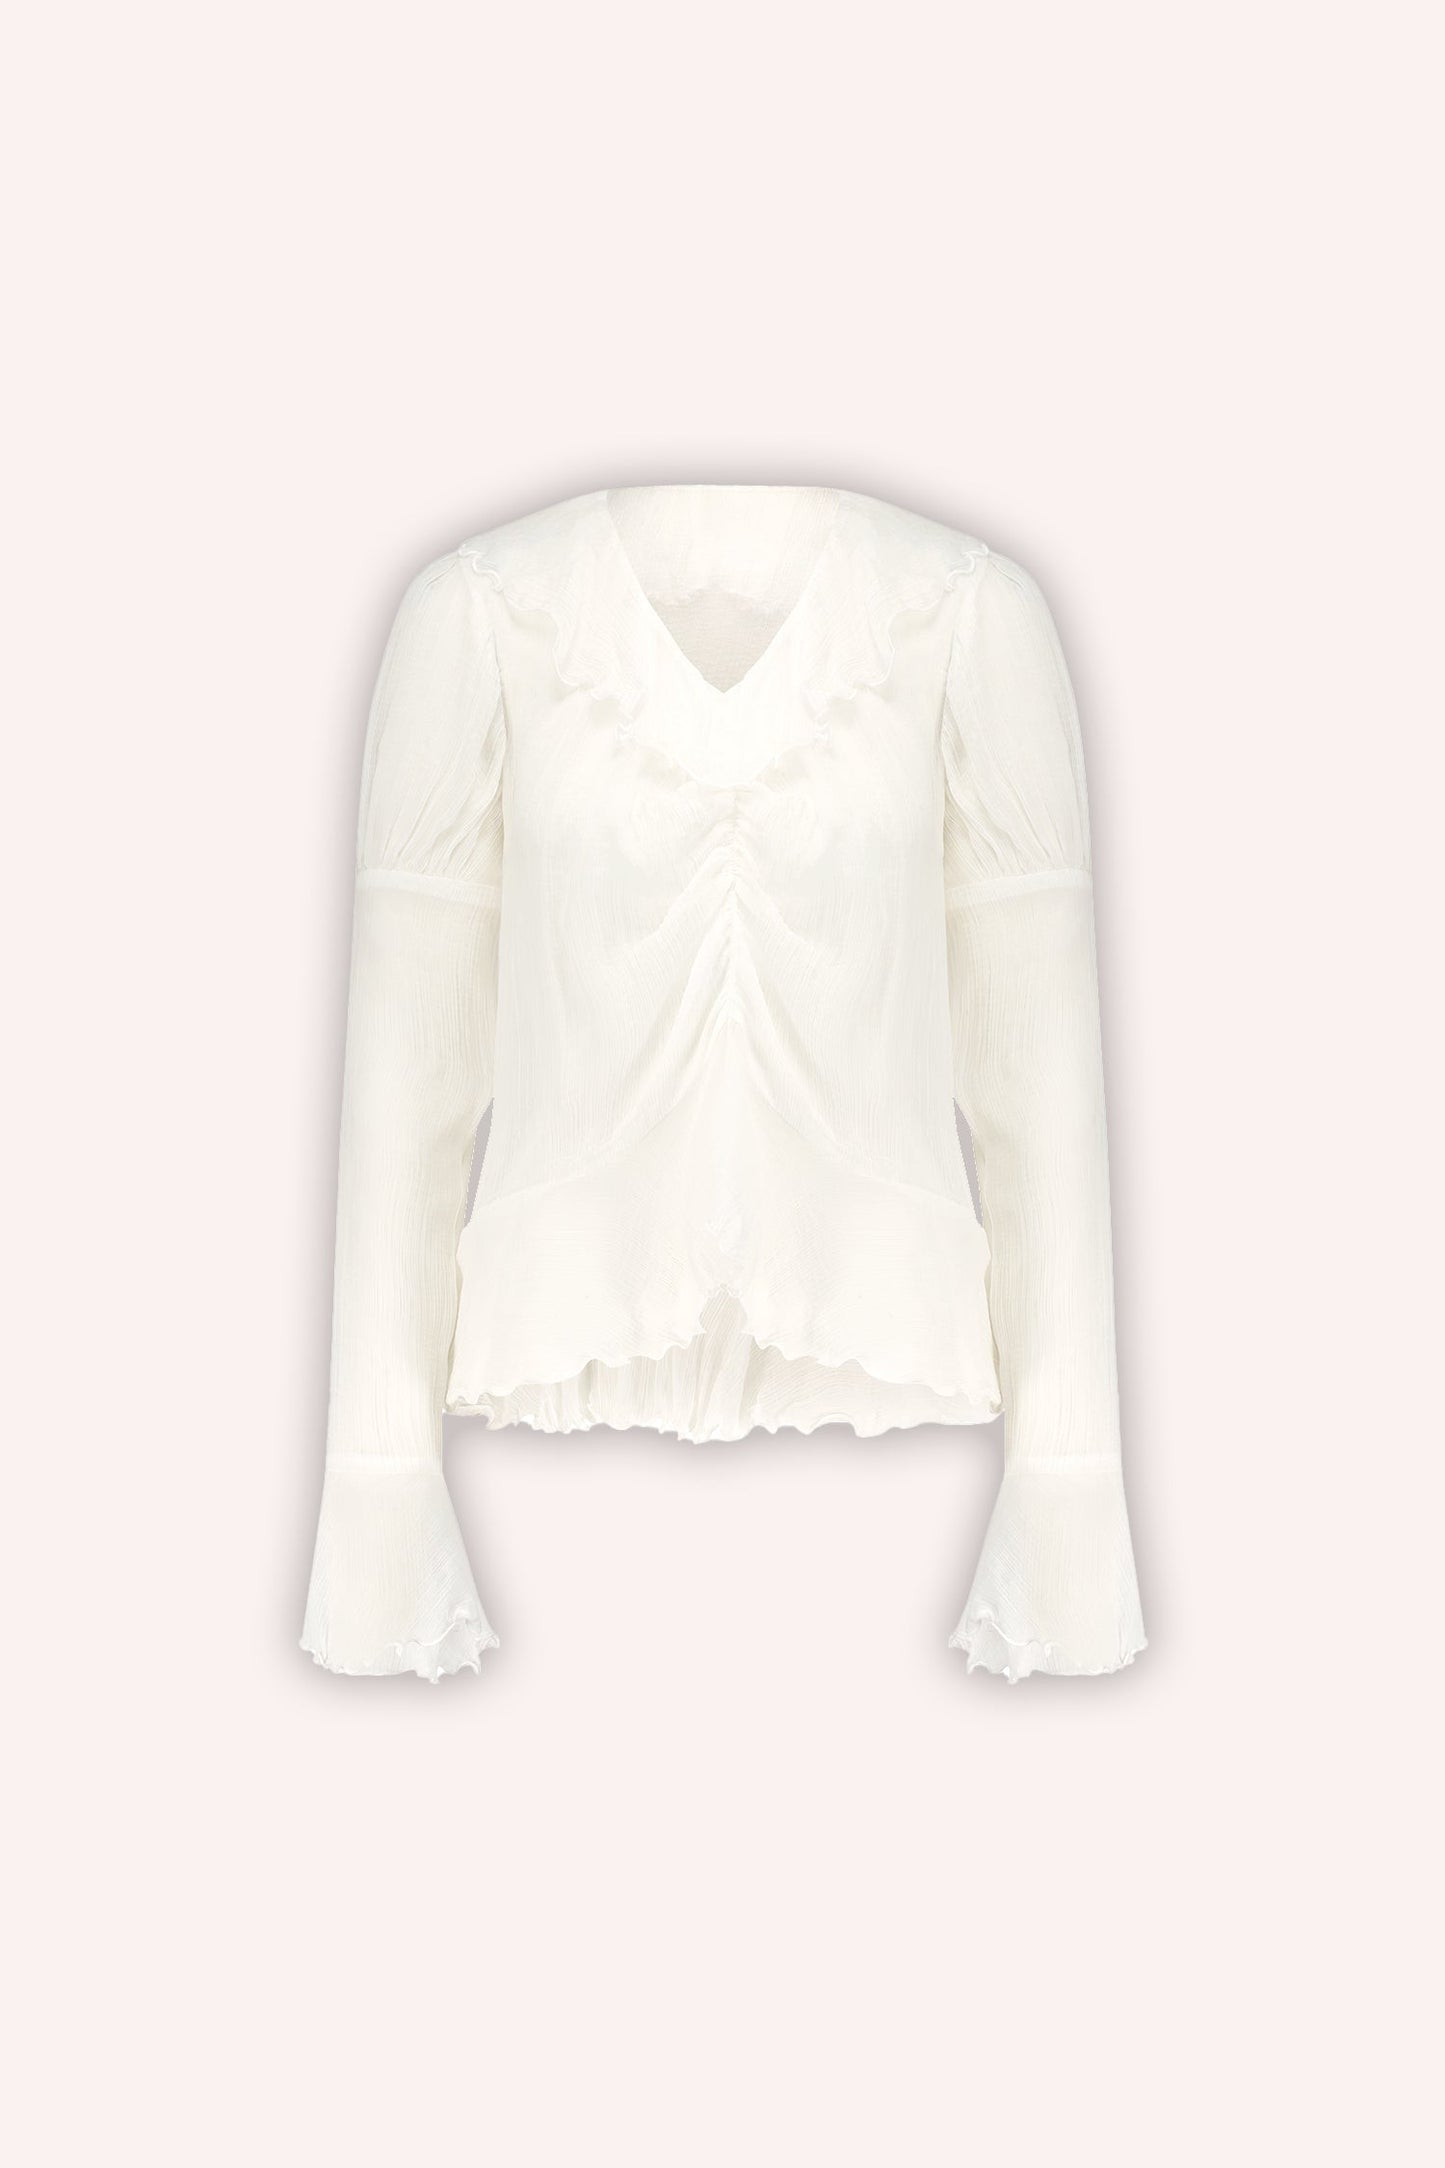 White crinkled chiffon blouse, long sleeves, flowing style with ruffles on the shoulders and cuffs